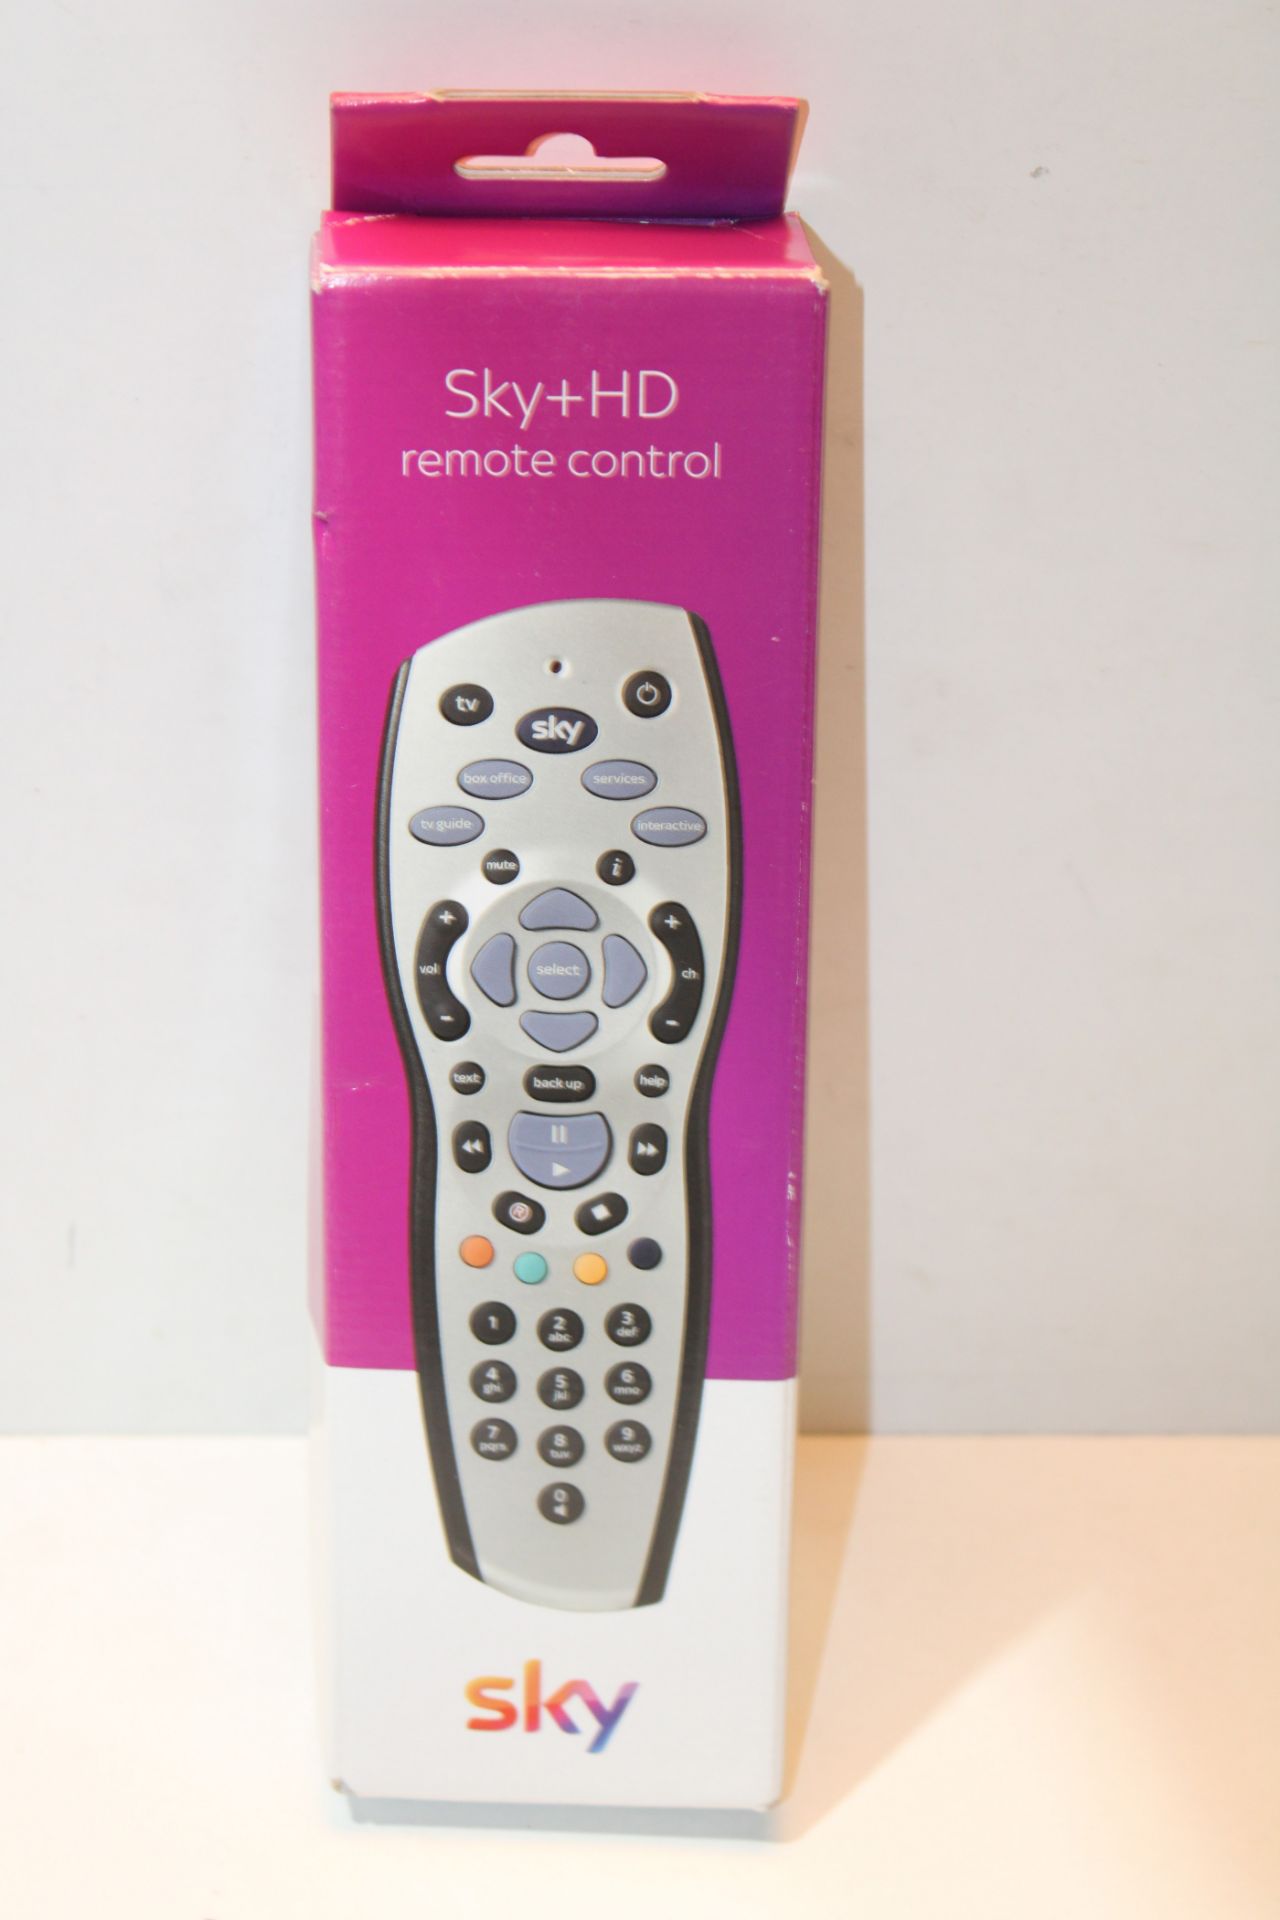 Original Sky+ HD remote Ð Duracell Batteries Included Ð Compatible with Sky+ HD digibox Ð Official